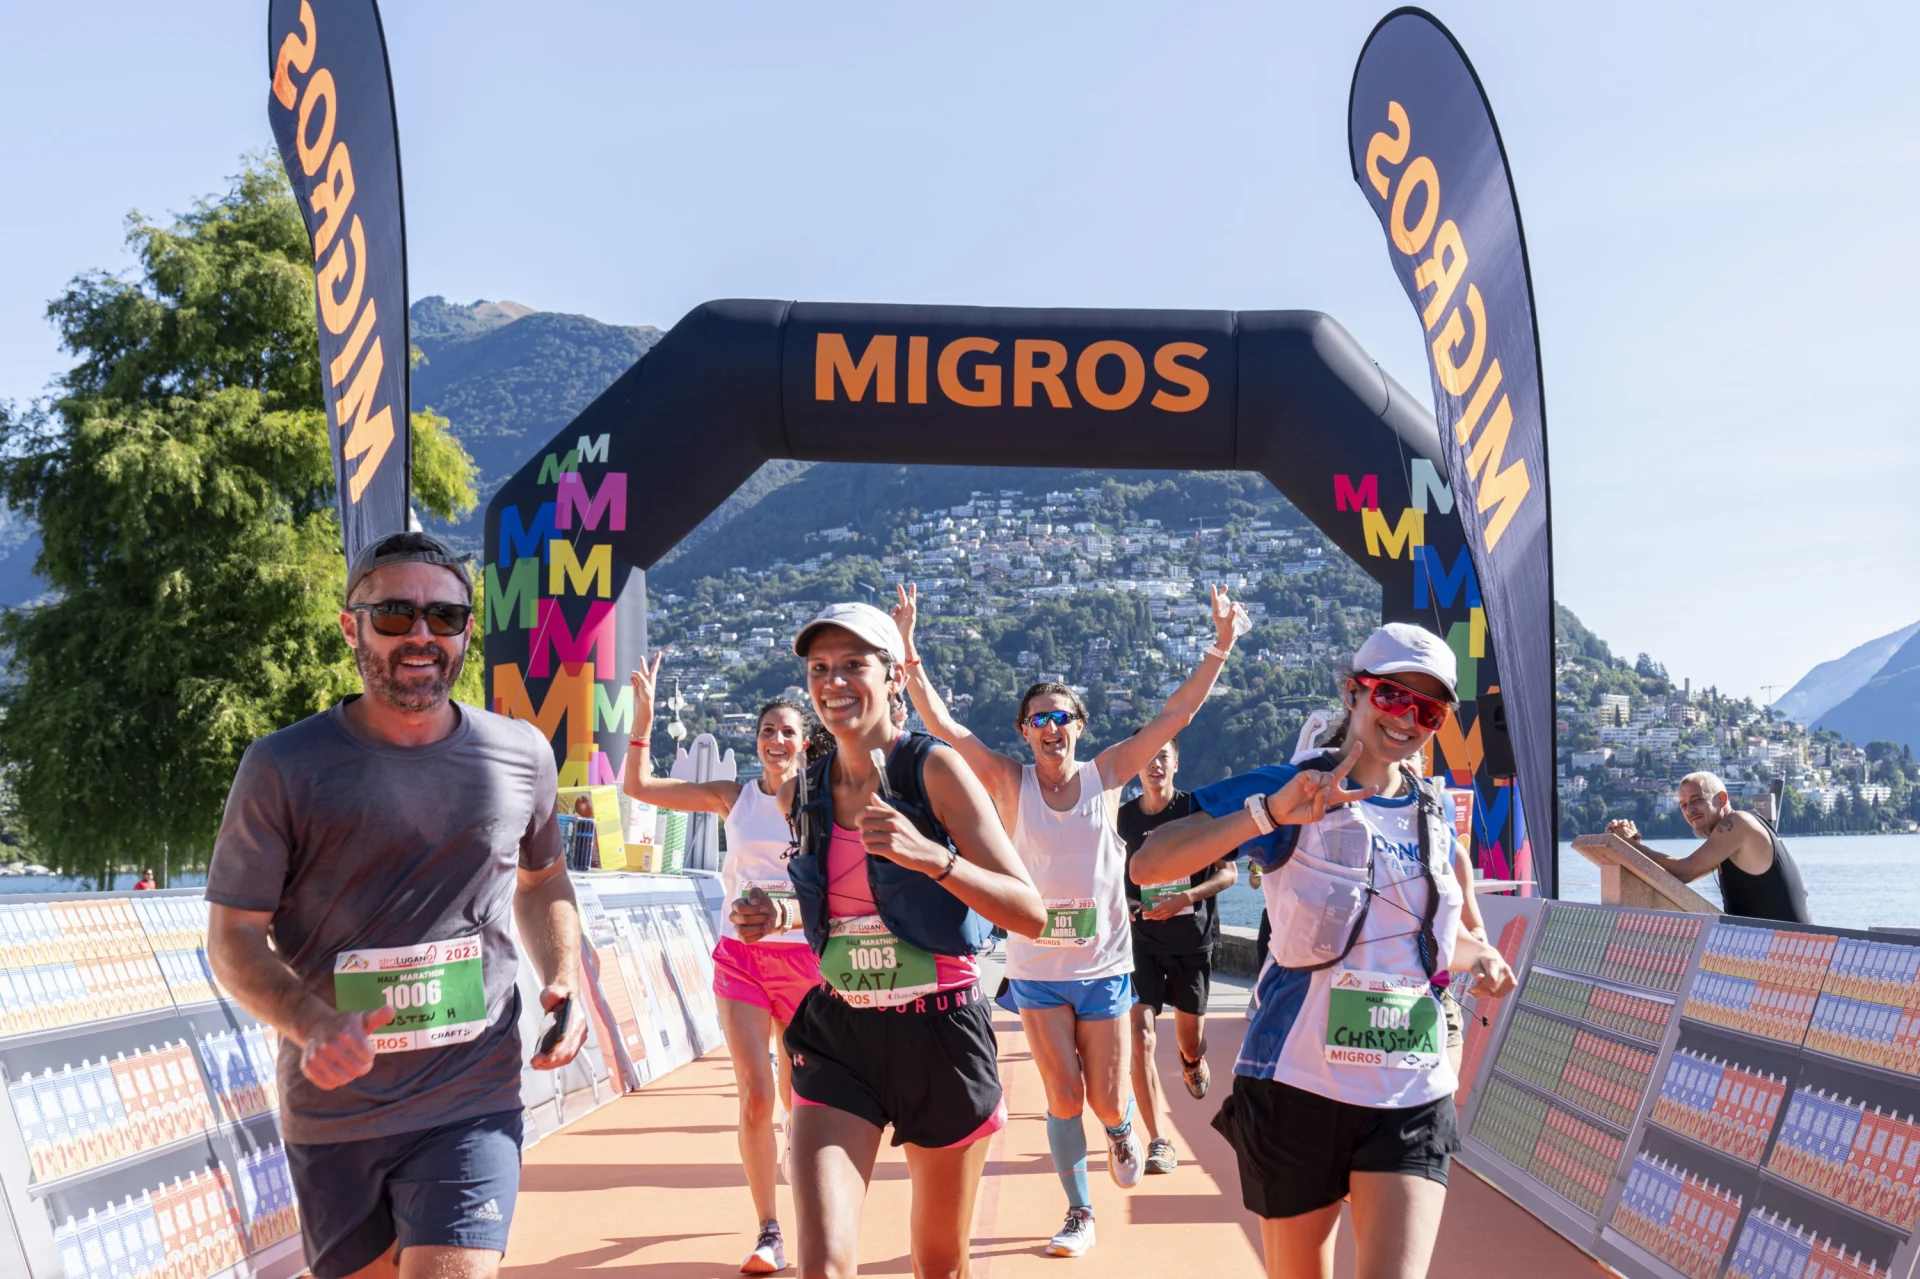 Runners cheer at the finish line of a Migros event.